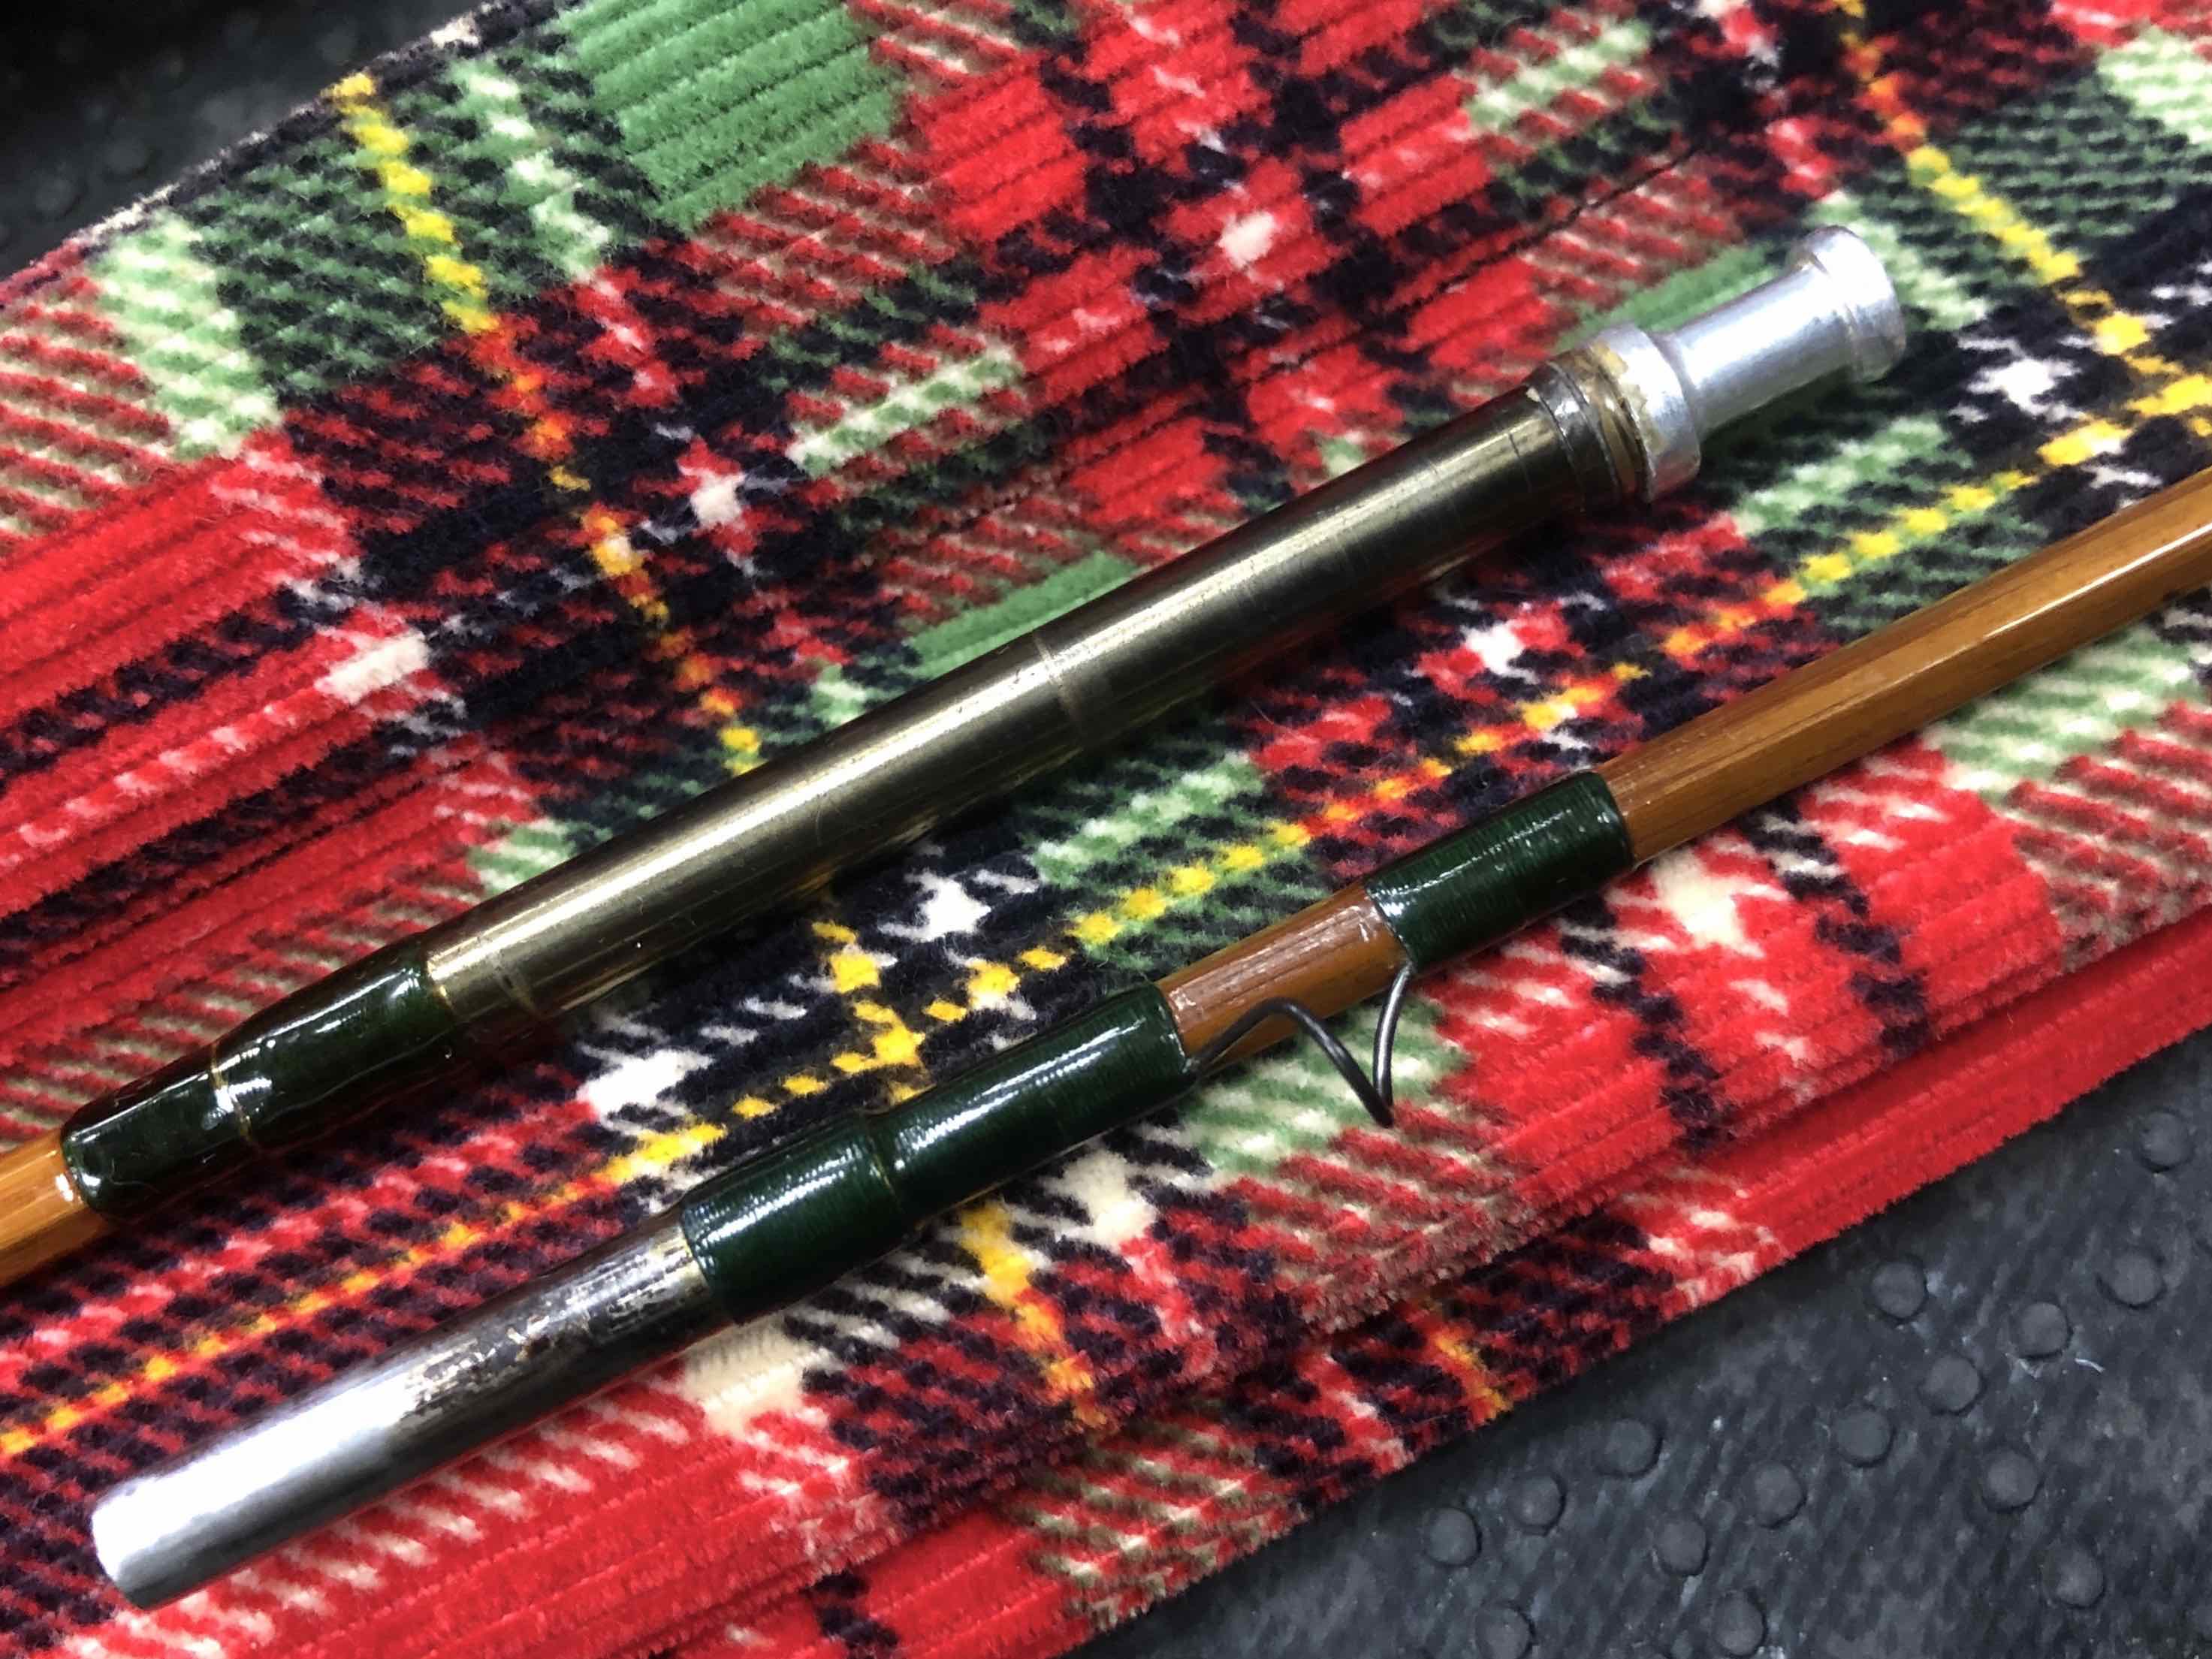 Bamboo Cane Rod Fly Rod - Built by Owner From Genuine Tonkin Cane in 1975 - 2Pc - 6 1/2’ - 4Wt - C/W Sock & Aluminum Tube - BEAUTIFUL CONDITION! - $300